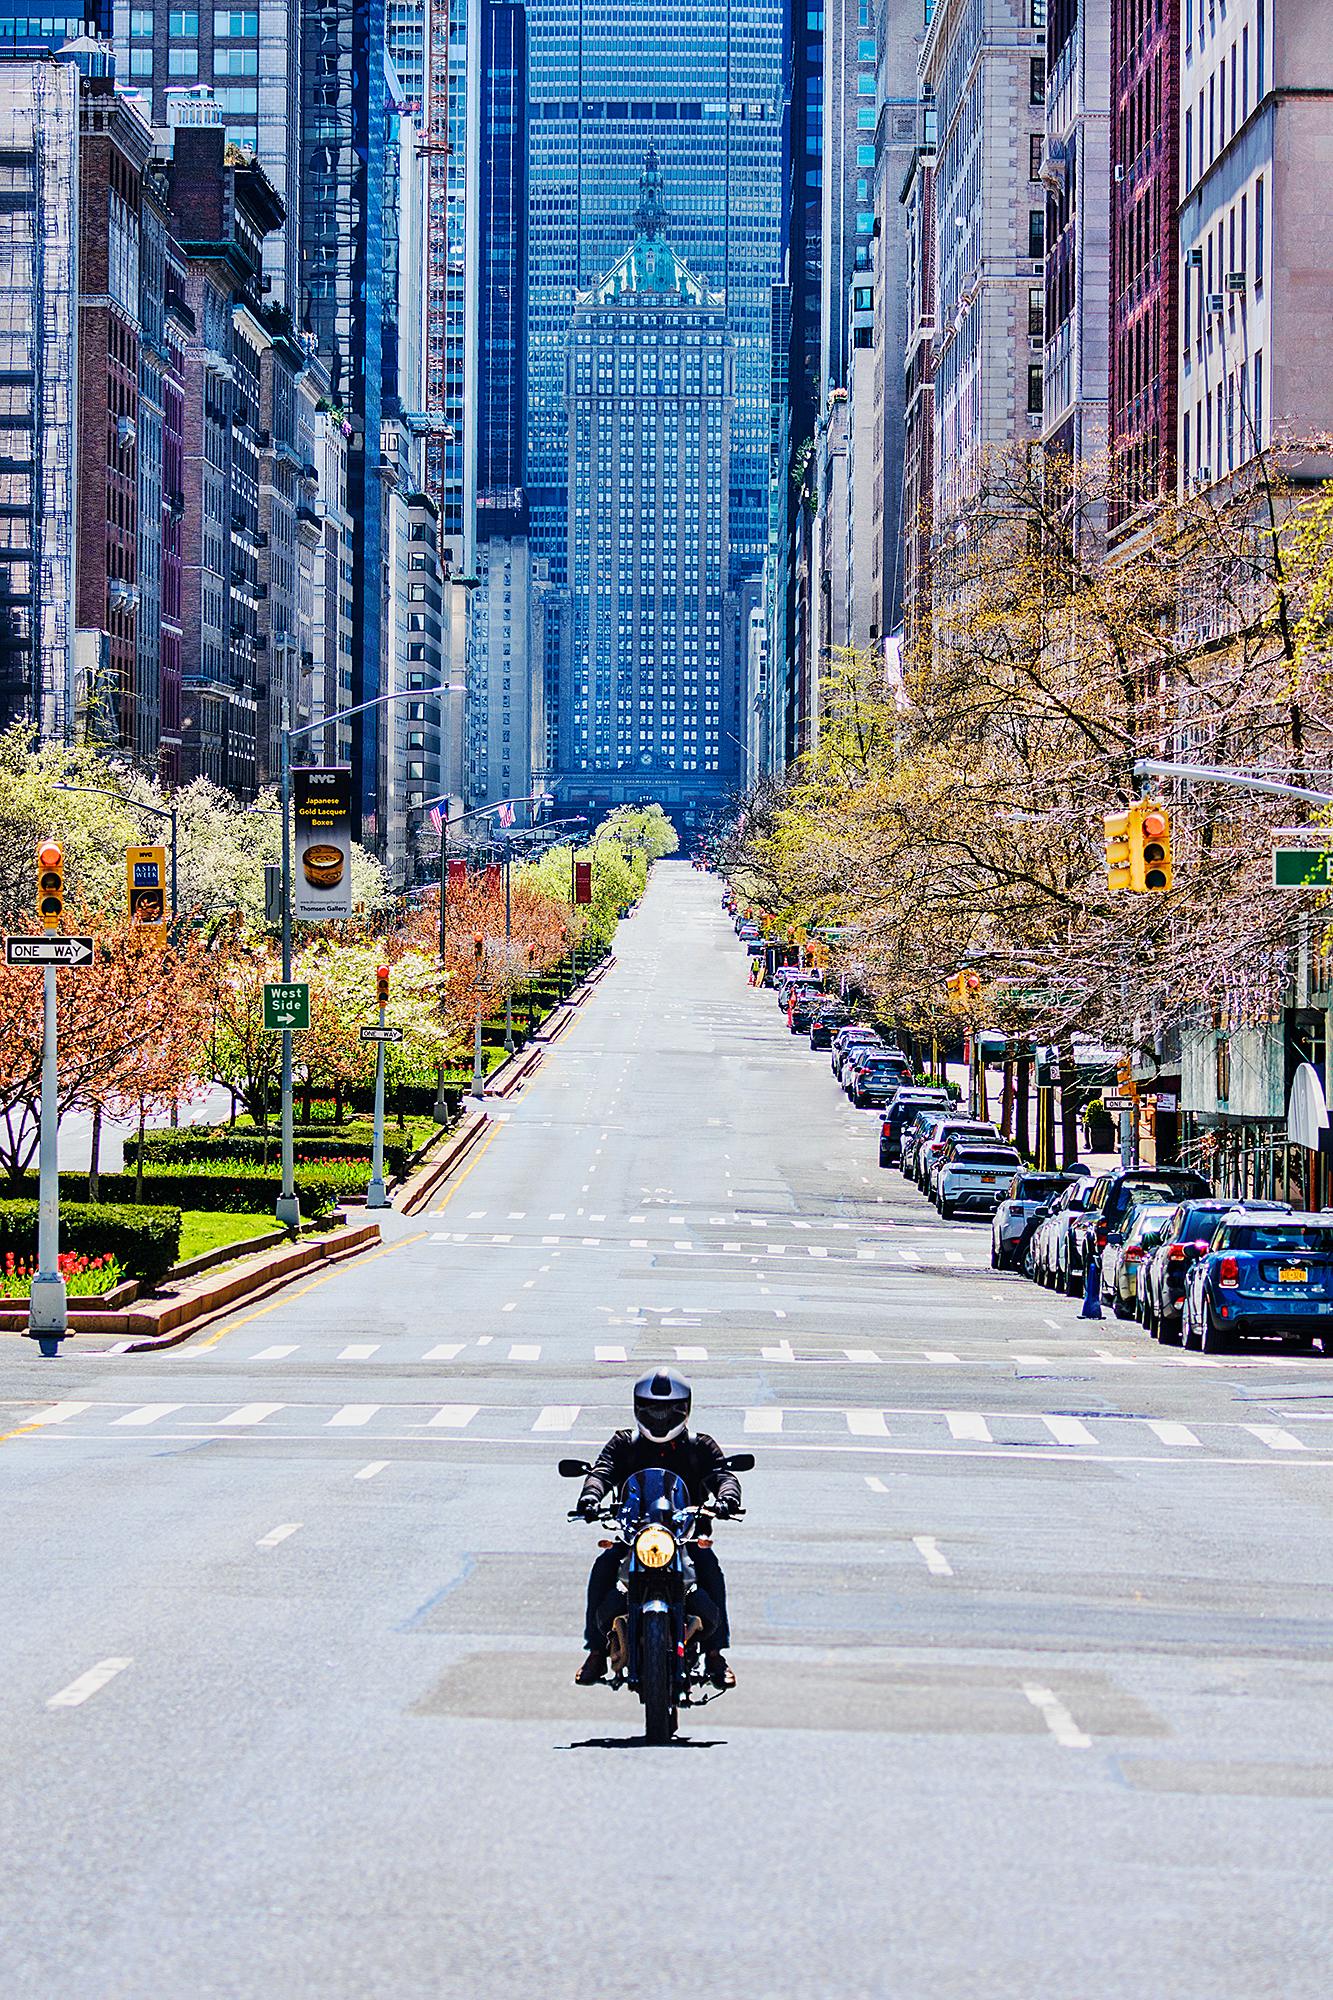 Mitchell Funk Color Photograph - Covid-19 New York City, Empty Park Avenue no Traffic Except a Lone Motorcycle